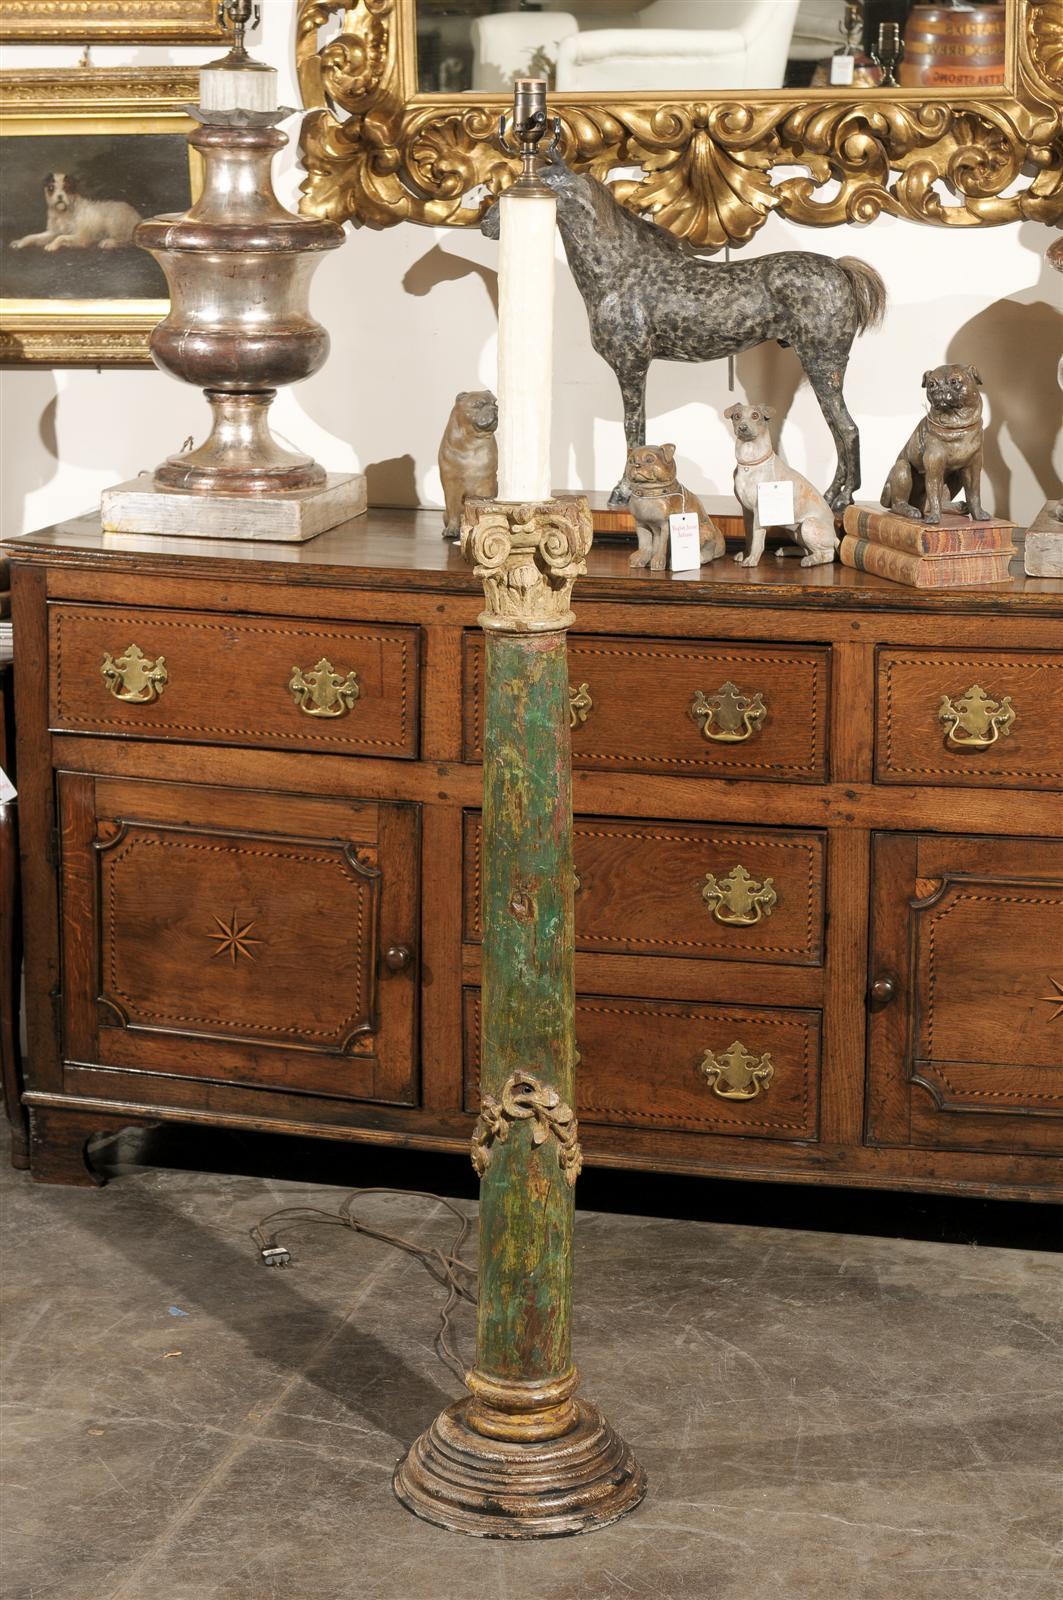 This exquisite Italian floor lamp from the early 19th century features a green painted wooden column supporting a carved Corinthian capital of tan color with acanthus leaves and volutes typical of this classical order. While the eye is immediately